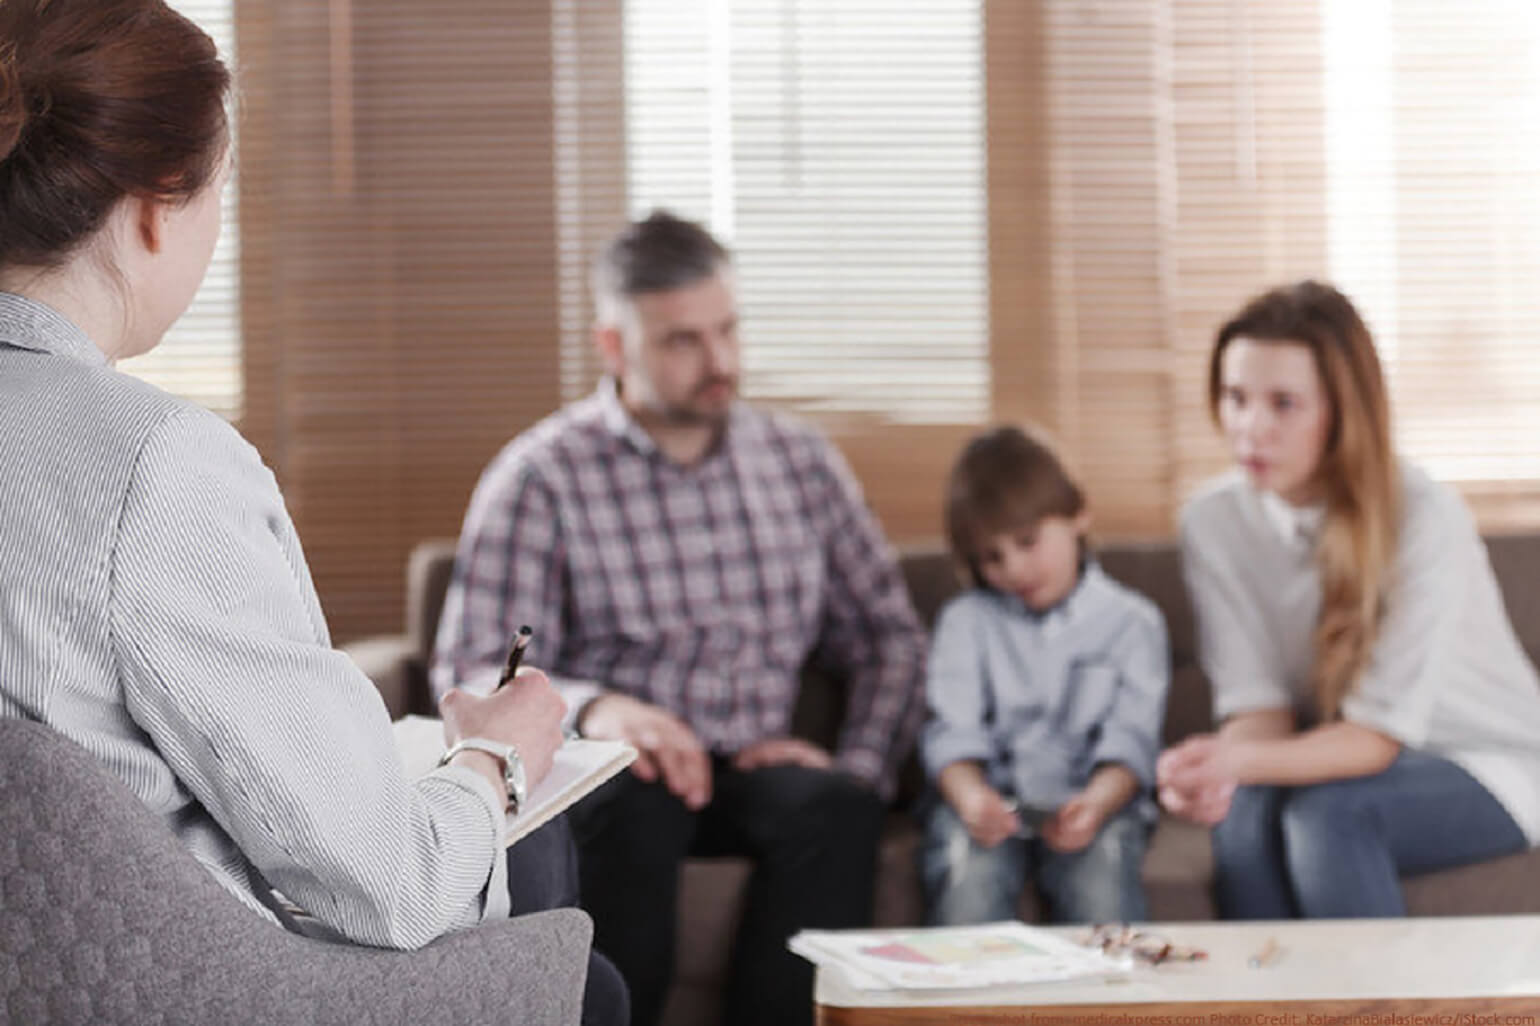 An image of a family therapy session. On the left, a therapist sits in a chair taking notes on a clipboard. On the opposite end of the room, out of focus, a family sits with a small child in the middle. In front of the family, there is a table with some of the child’s drawings